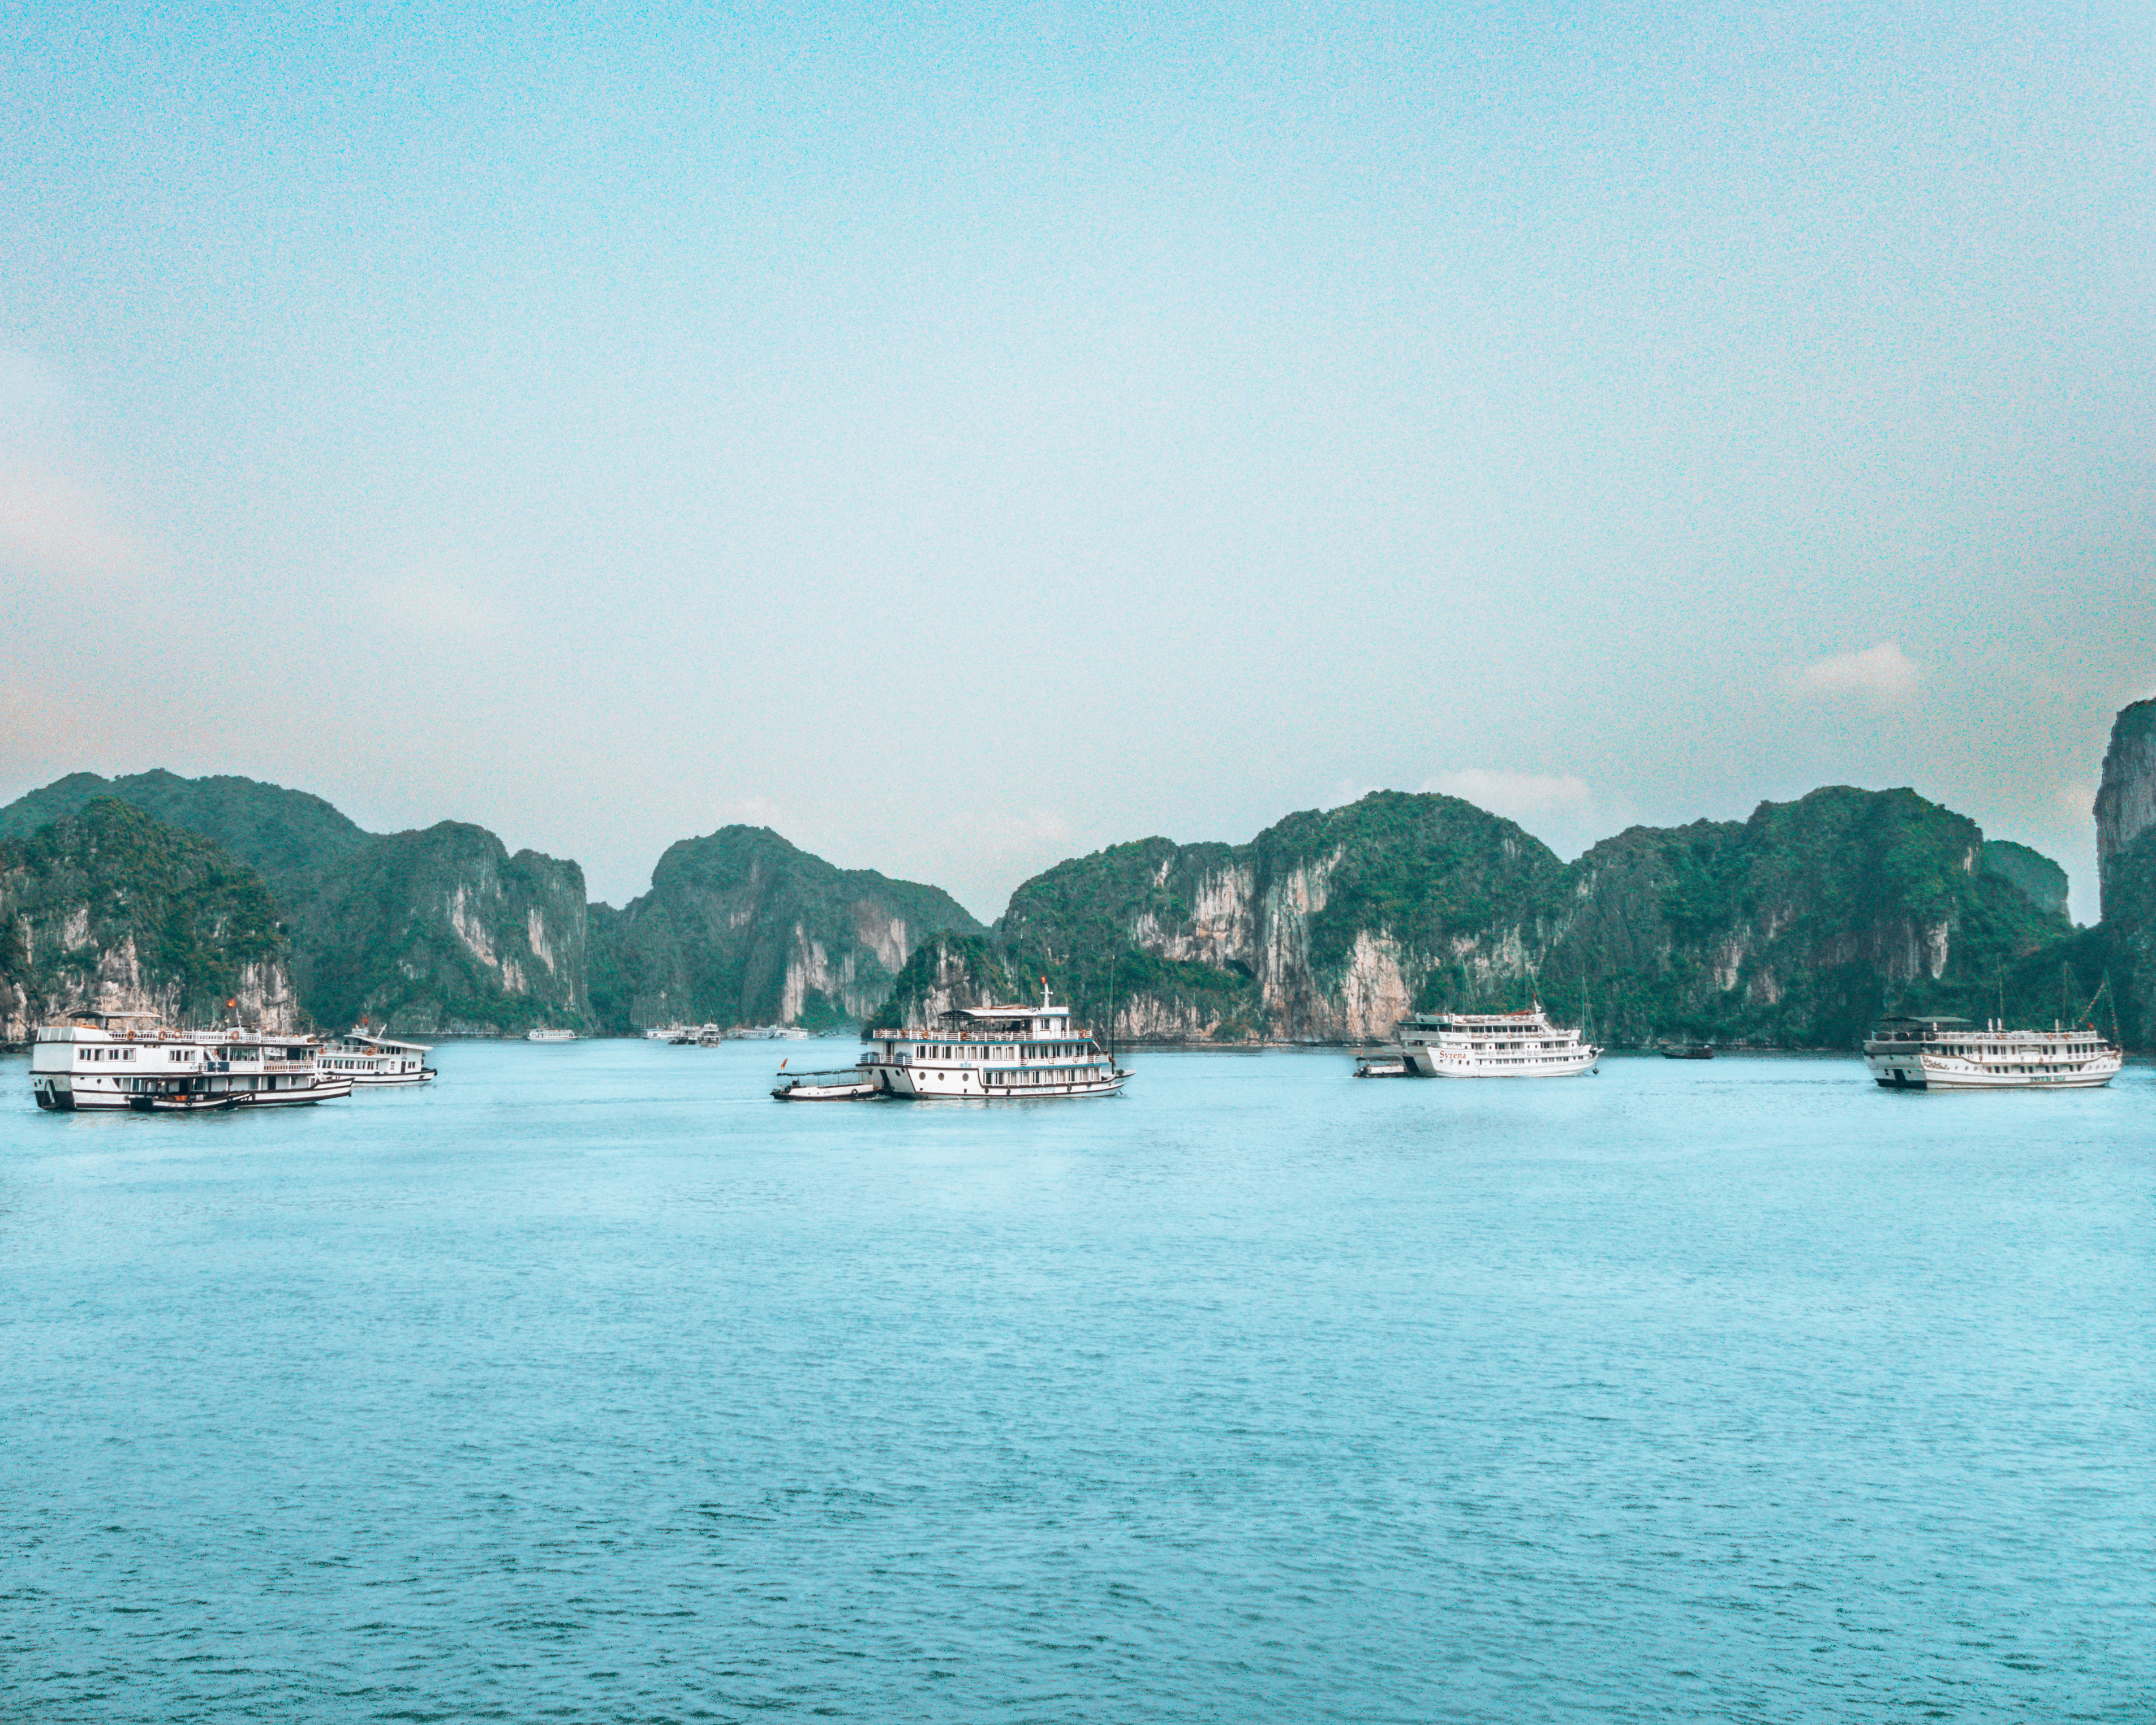 Tour boats in Halong Bay Vietnam